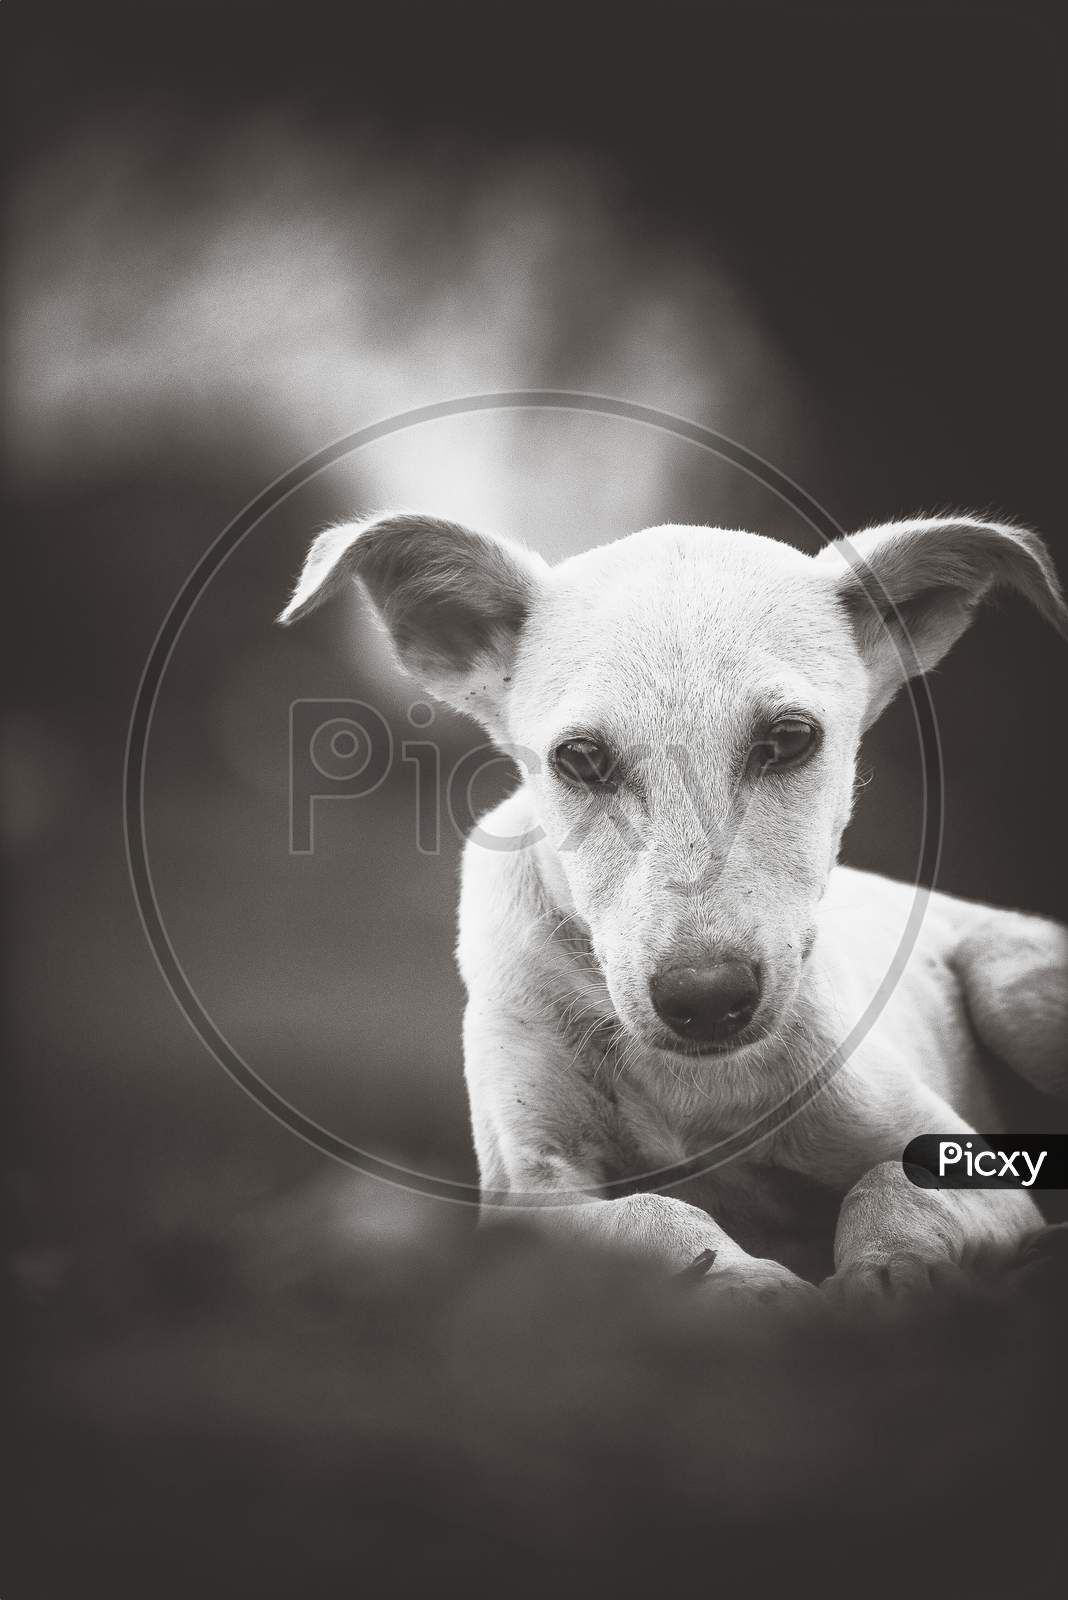 Cute puppy dog with beautiful looks in black and white